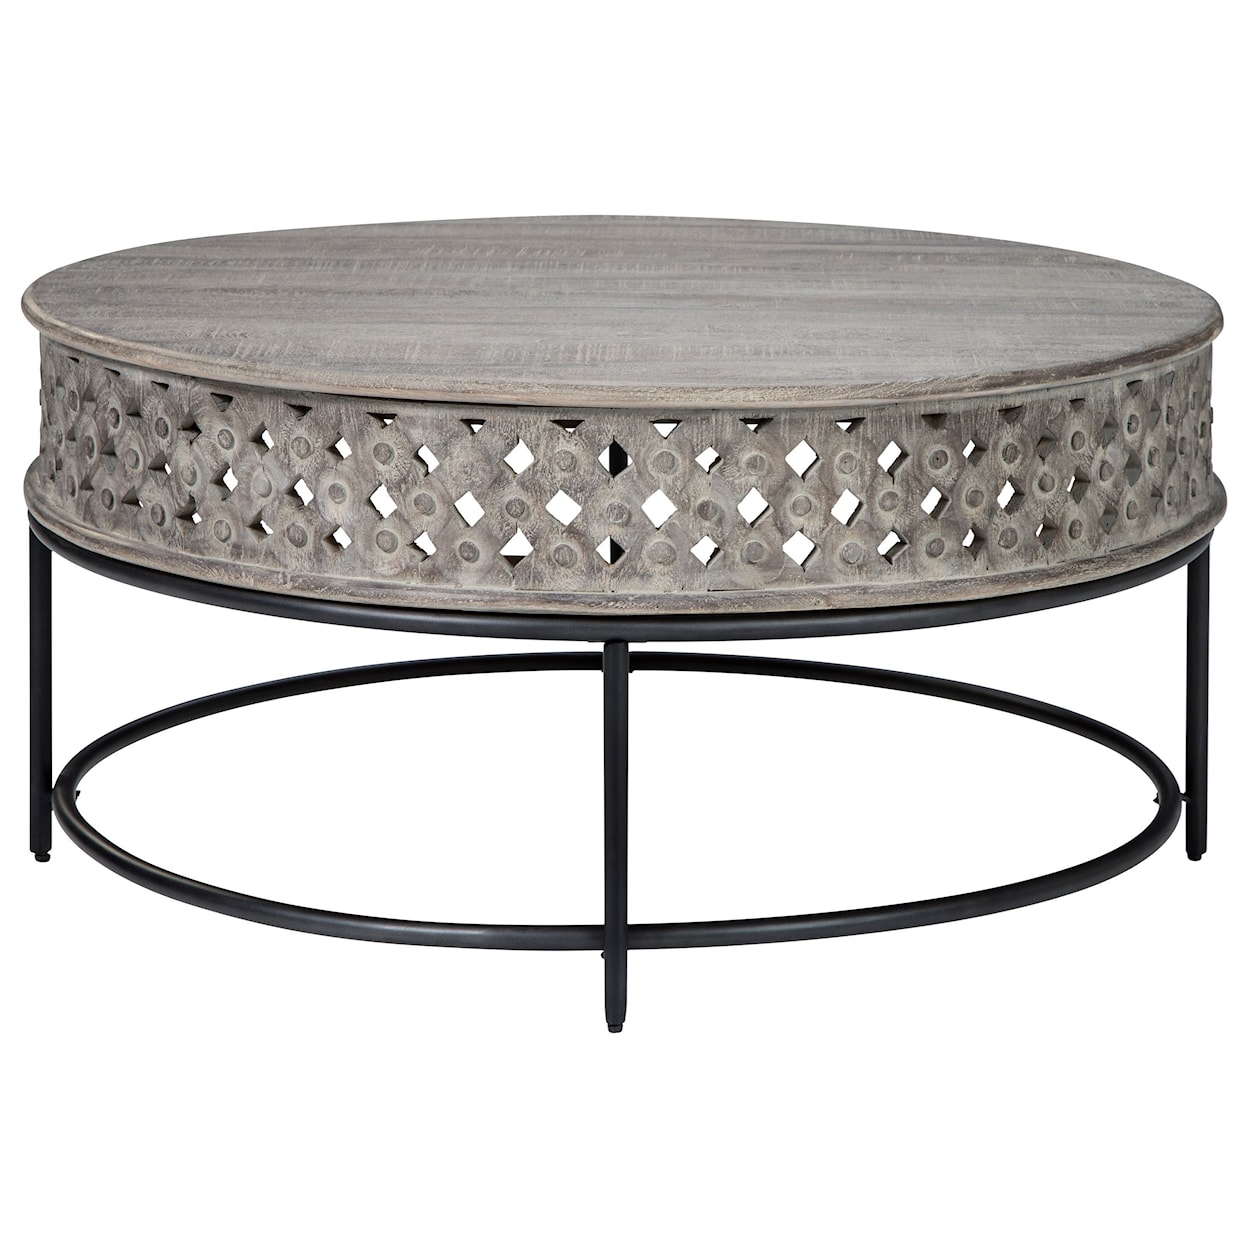 Signature Design by Ashley Rastella Round Cocktail Table